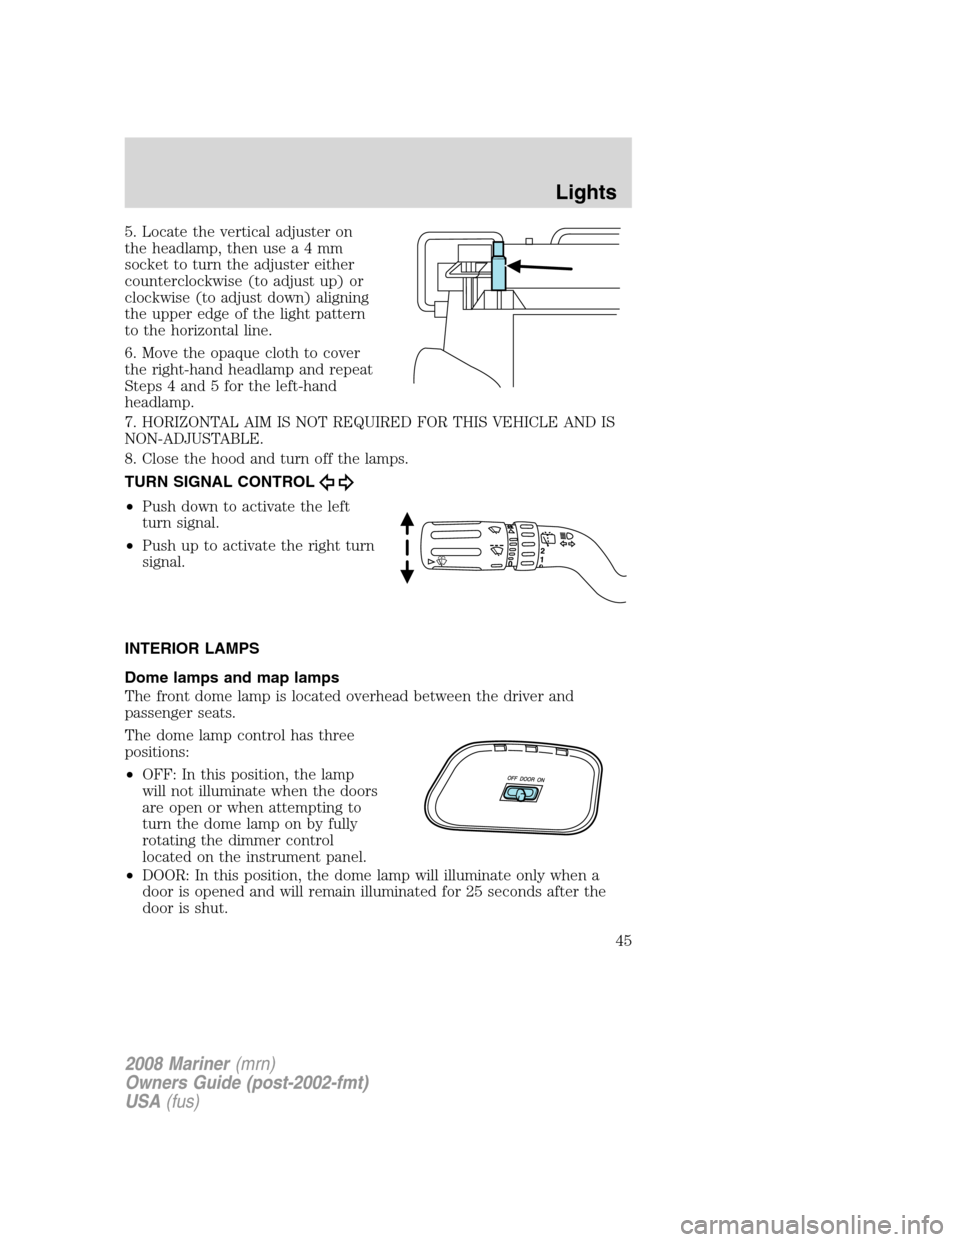 Mercury Mariner 2008  Owners Manuals 5. Locate the vertical adjuster on
the headlamp, then usea4mm
socket to turn the adjuster either
counterclockwise (to adjust up) or
clockwise (to adjust down) aligning
the upper edge of the light patt